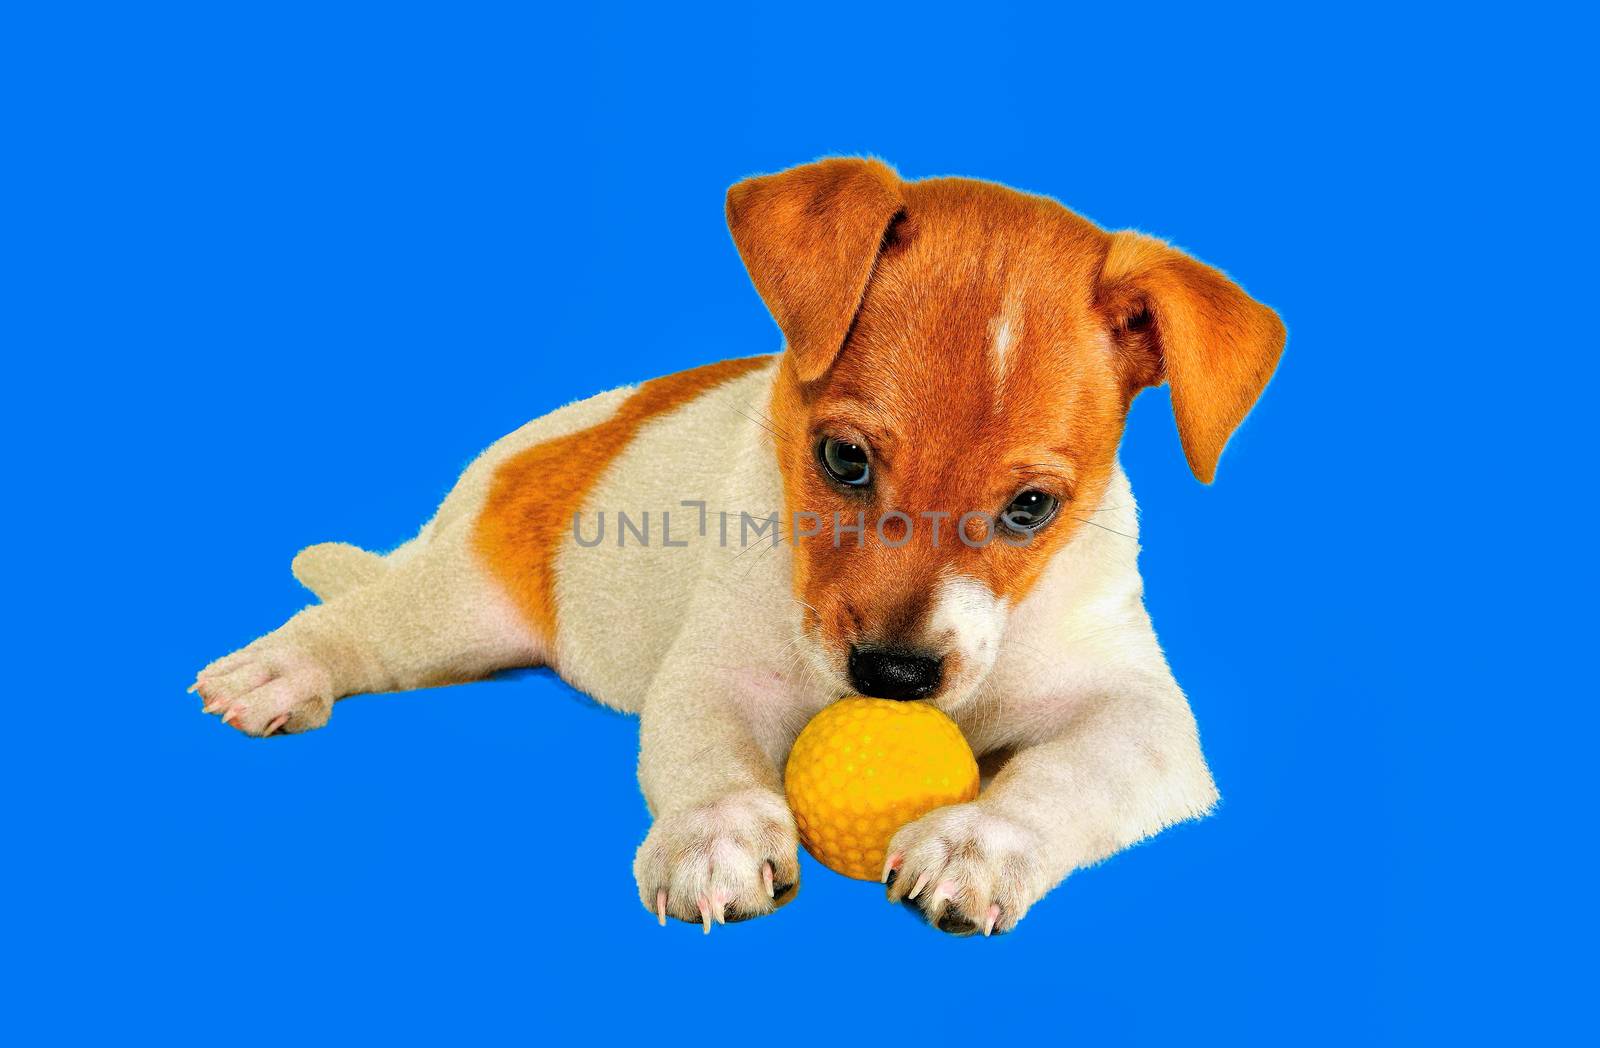 Puppy with a ball  by ben44